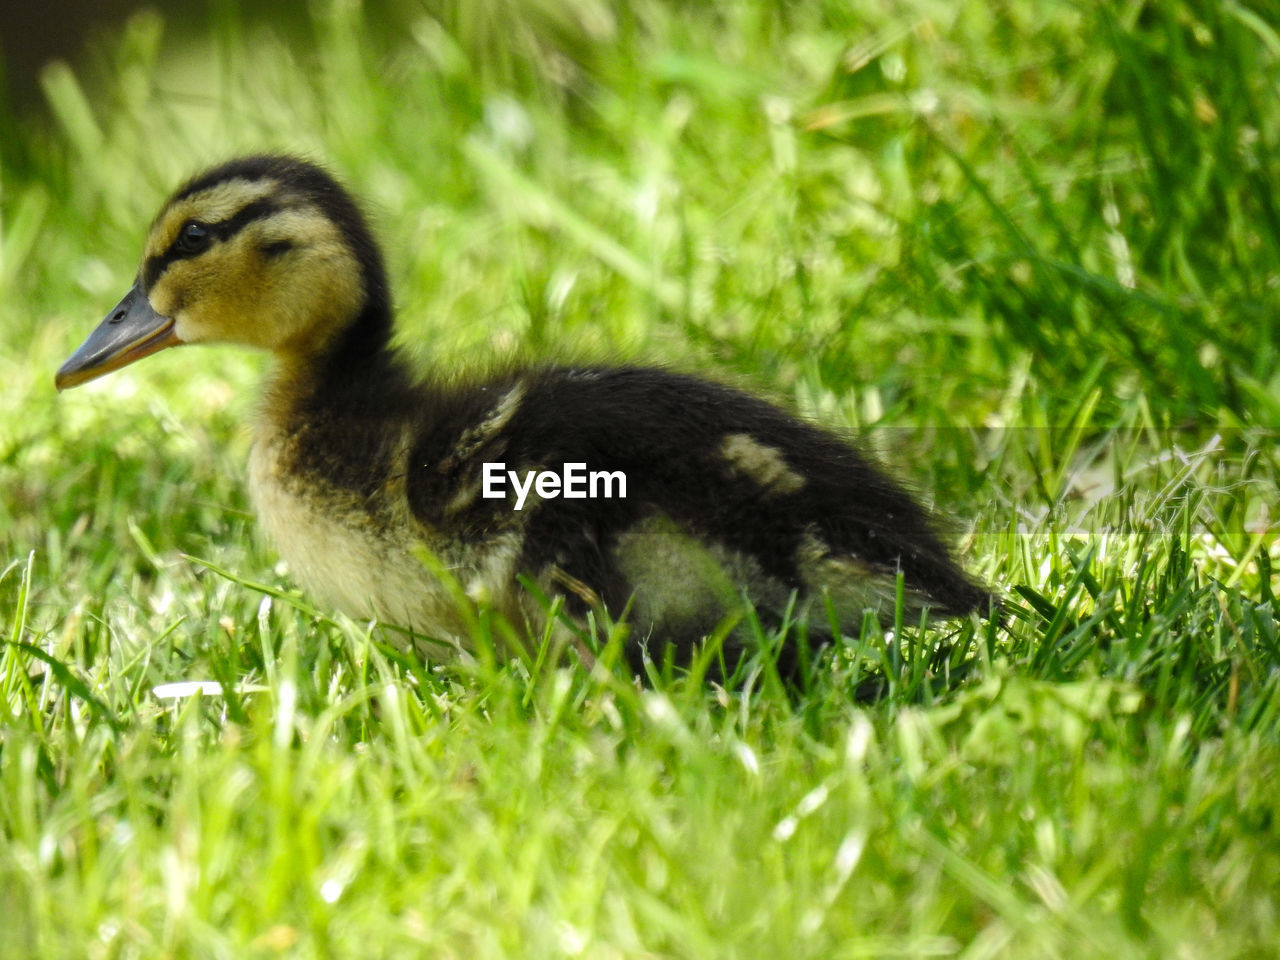 CLOSE-UP OF DUCK ON GRASS